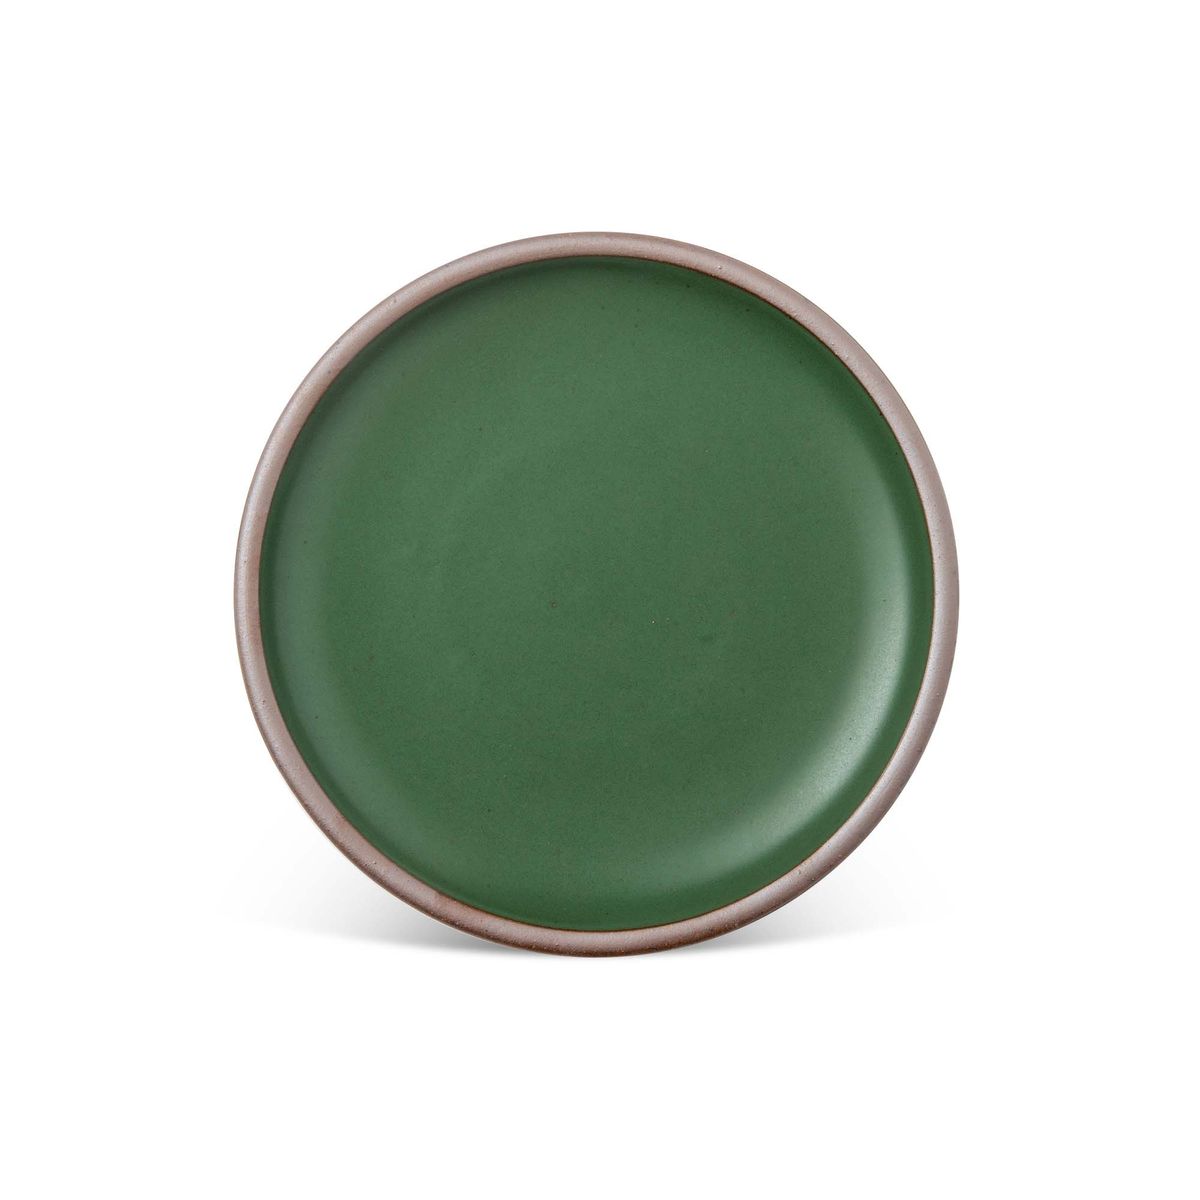 A dinner sized ceramic plate in a deep, verdant green color featuring iron speckles and an unglazed rim